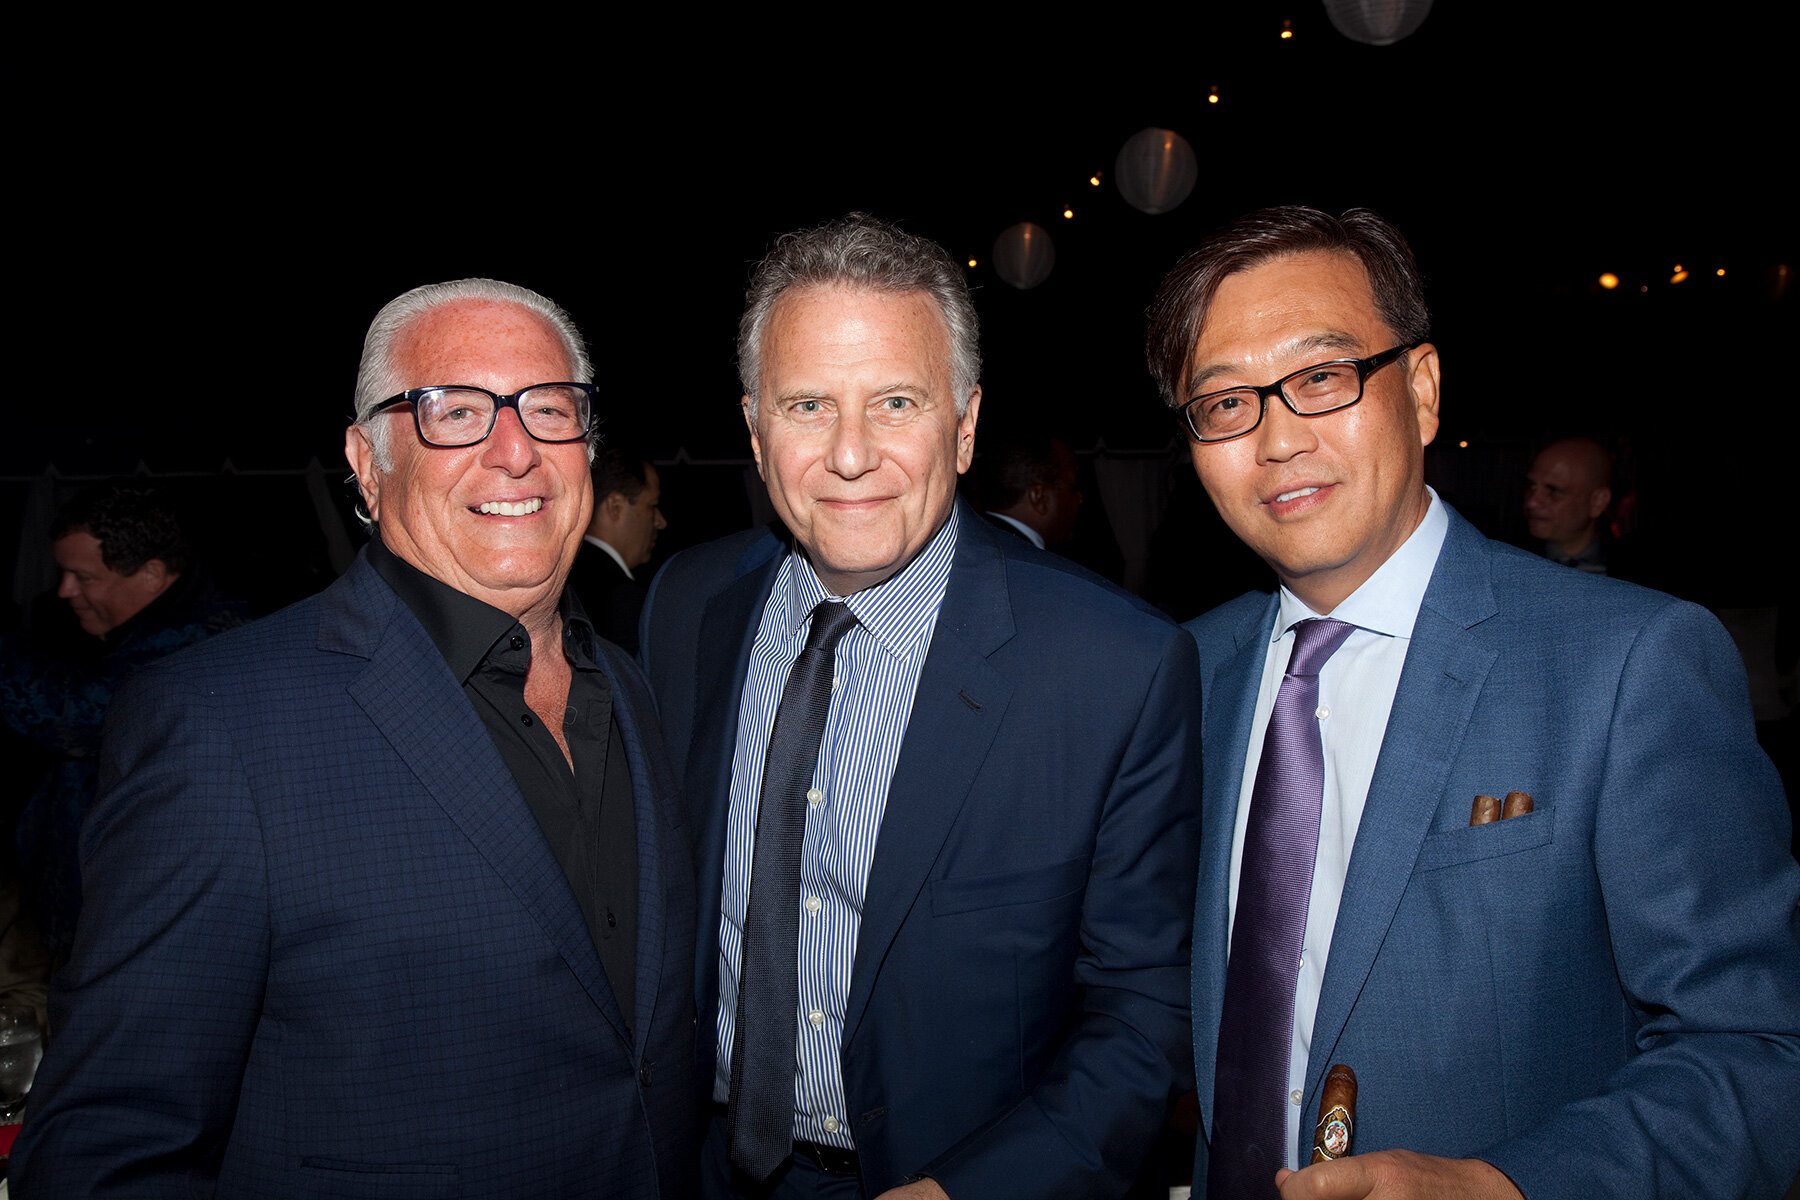 Wayne Schur (left) from New Jersey with Paul Reiser (center) and Keith K. Park